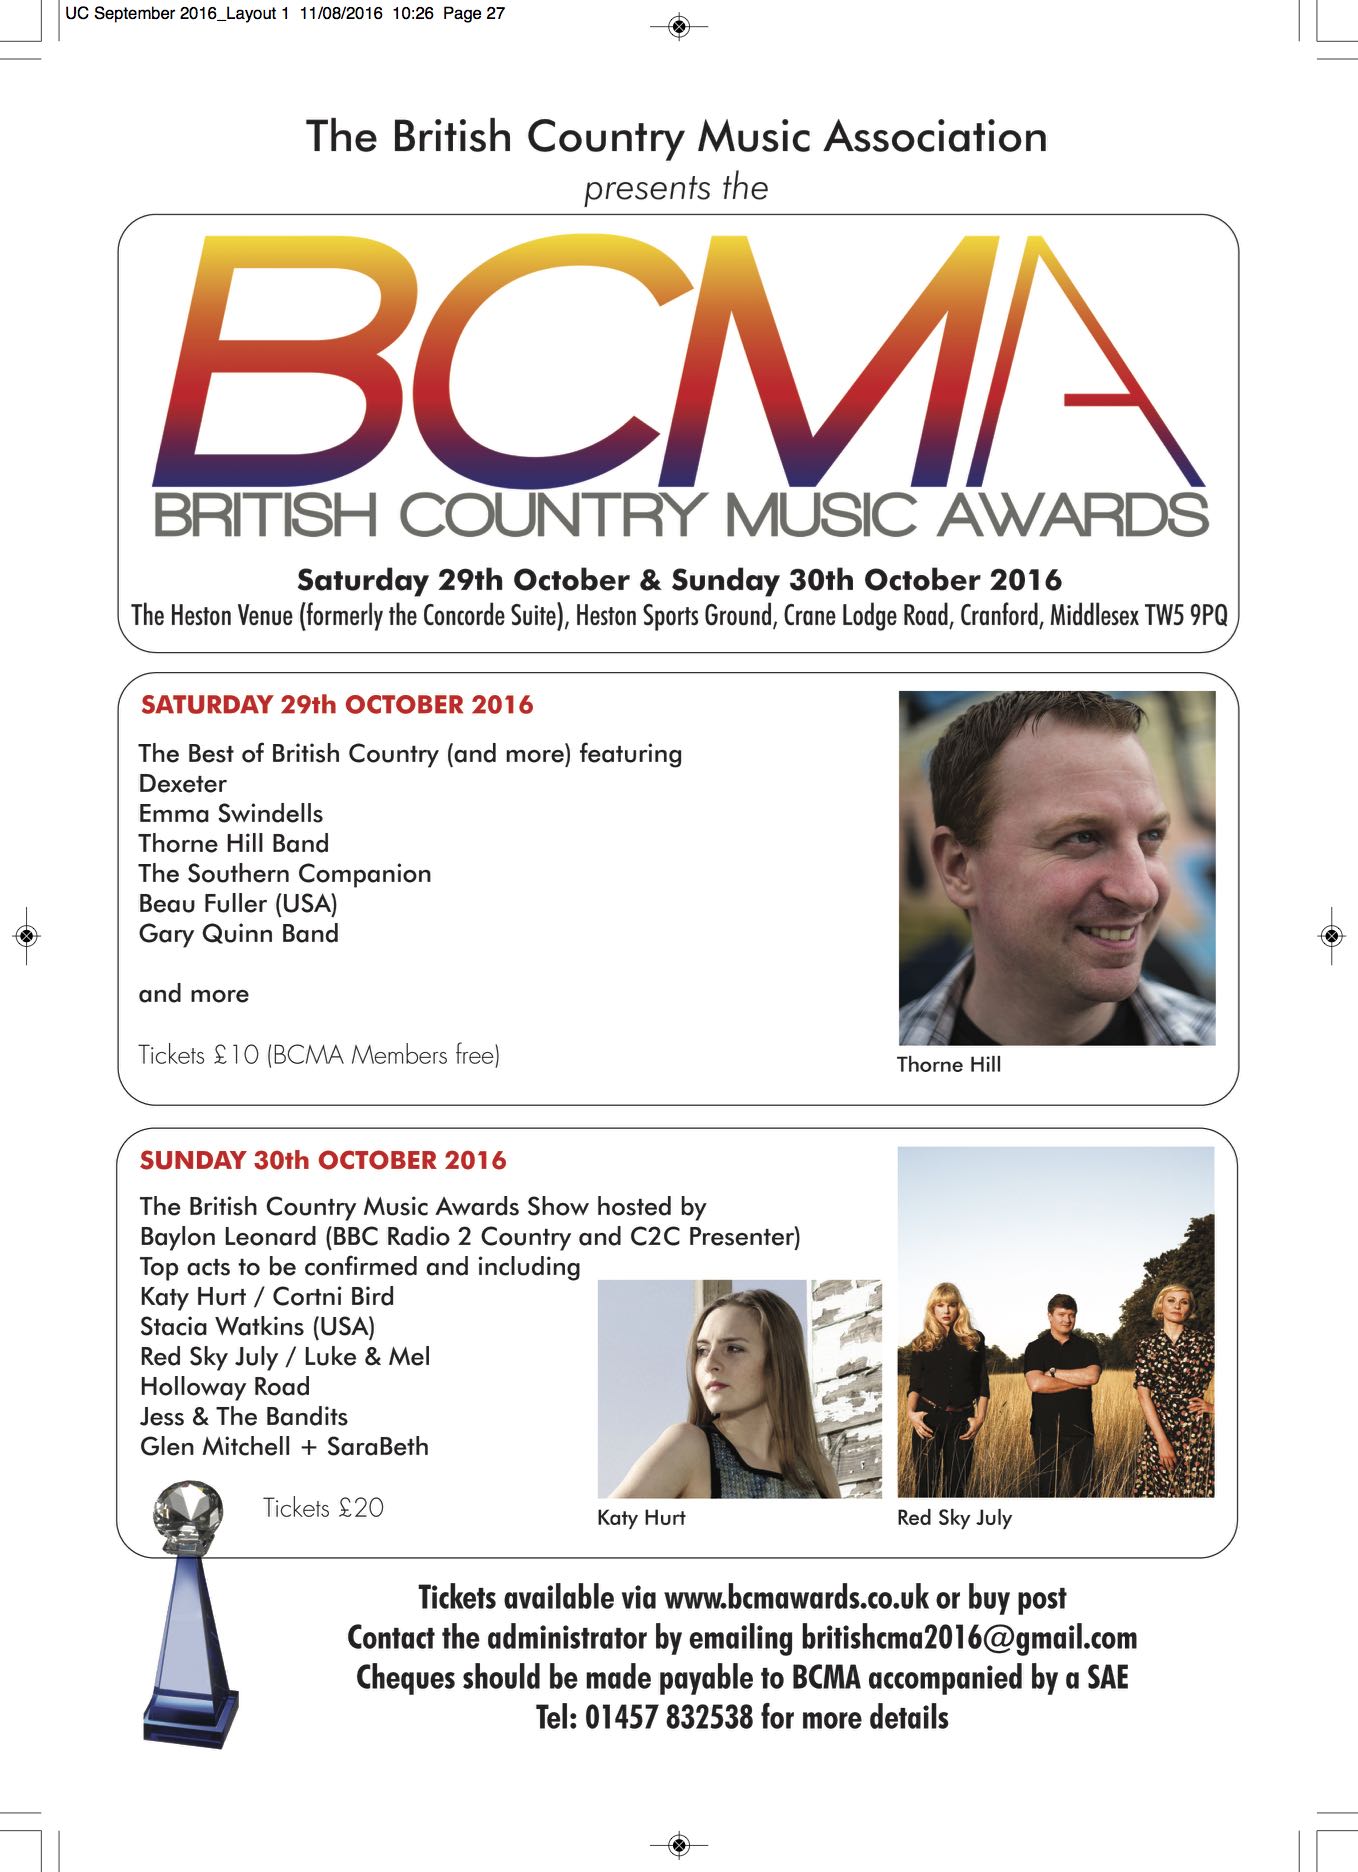 British Country Music Awards Flyer